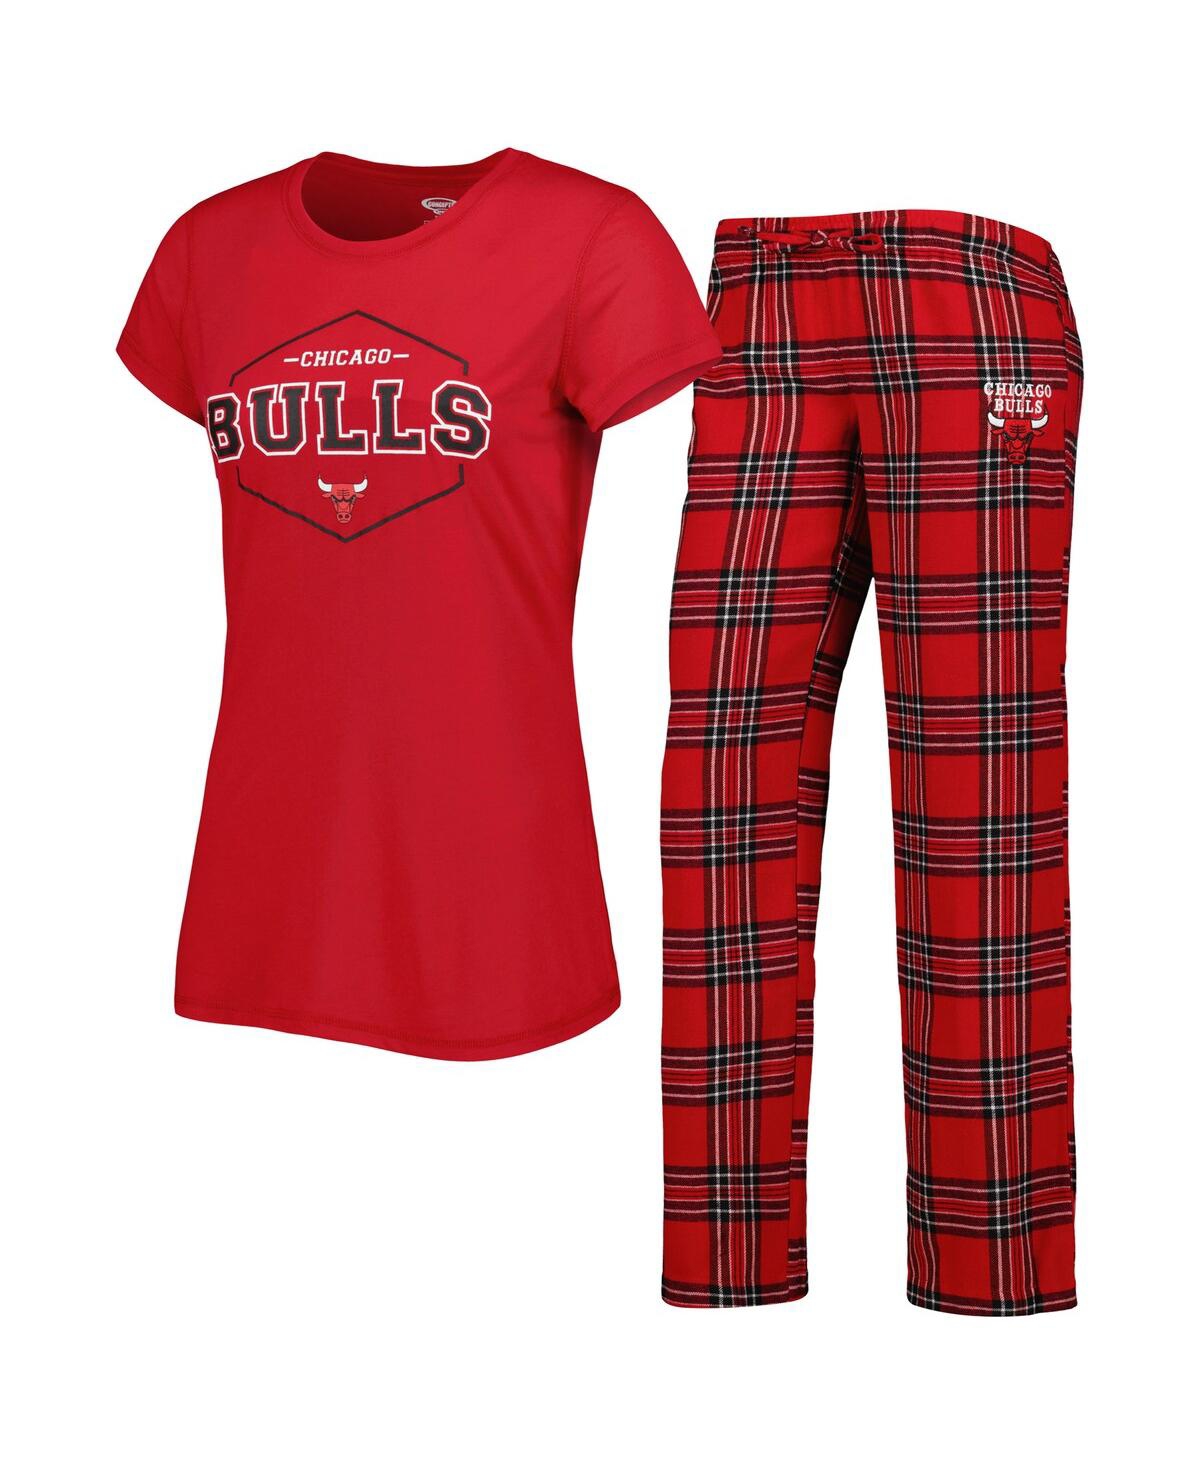 Women's Concepts Sport Red, Black Chicago Bulls Badge T-shirt and Pajama Pants Sleep Set - Red, Black